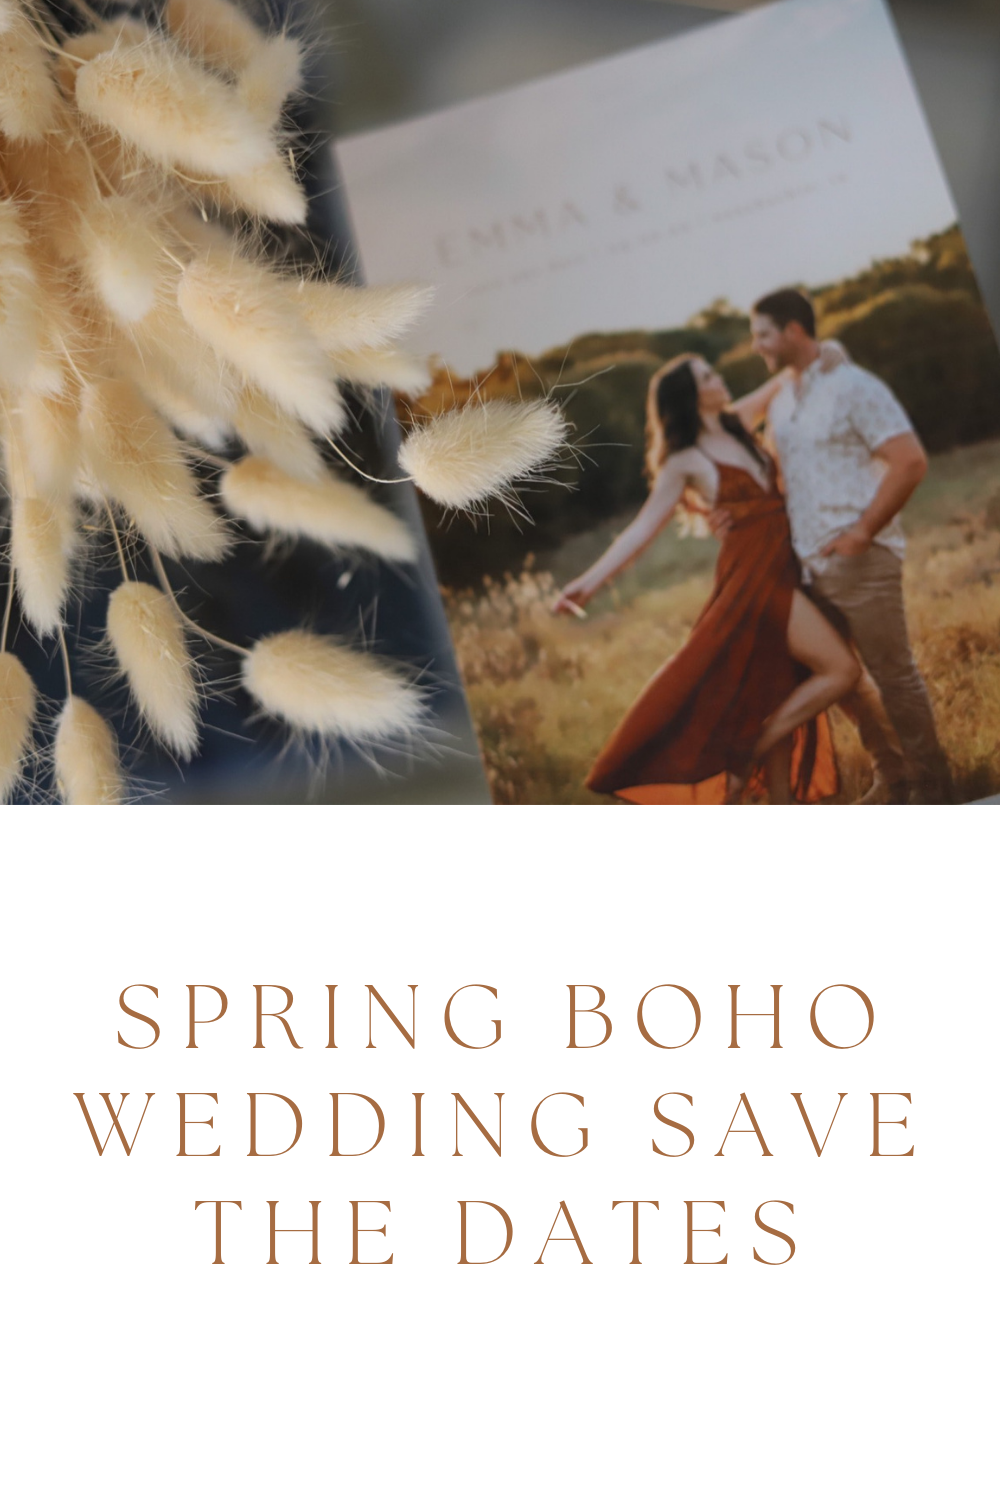 spring boho moody jewel tone save the date wedding cards, rusts, greens, lments of style, texas wedding, bunny tails mini pampas grass